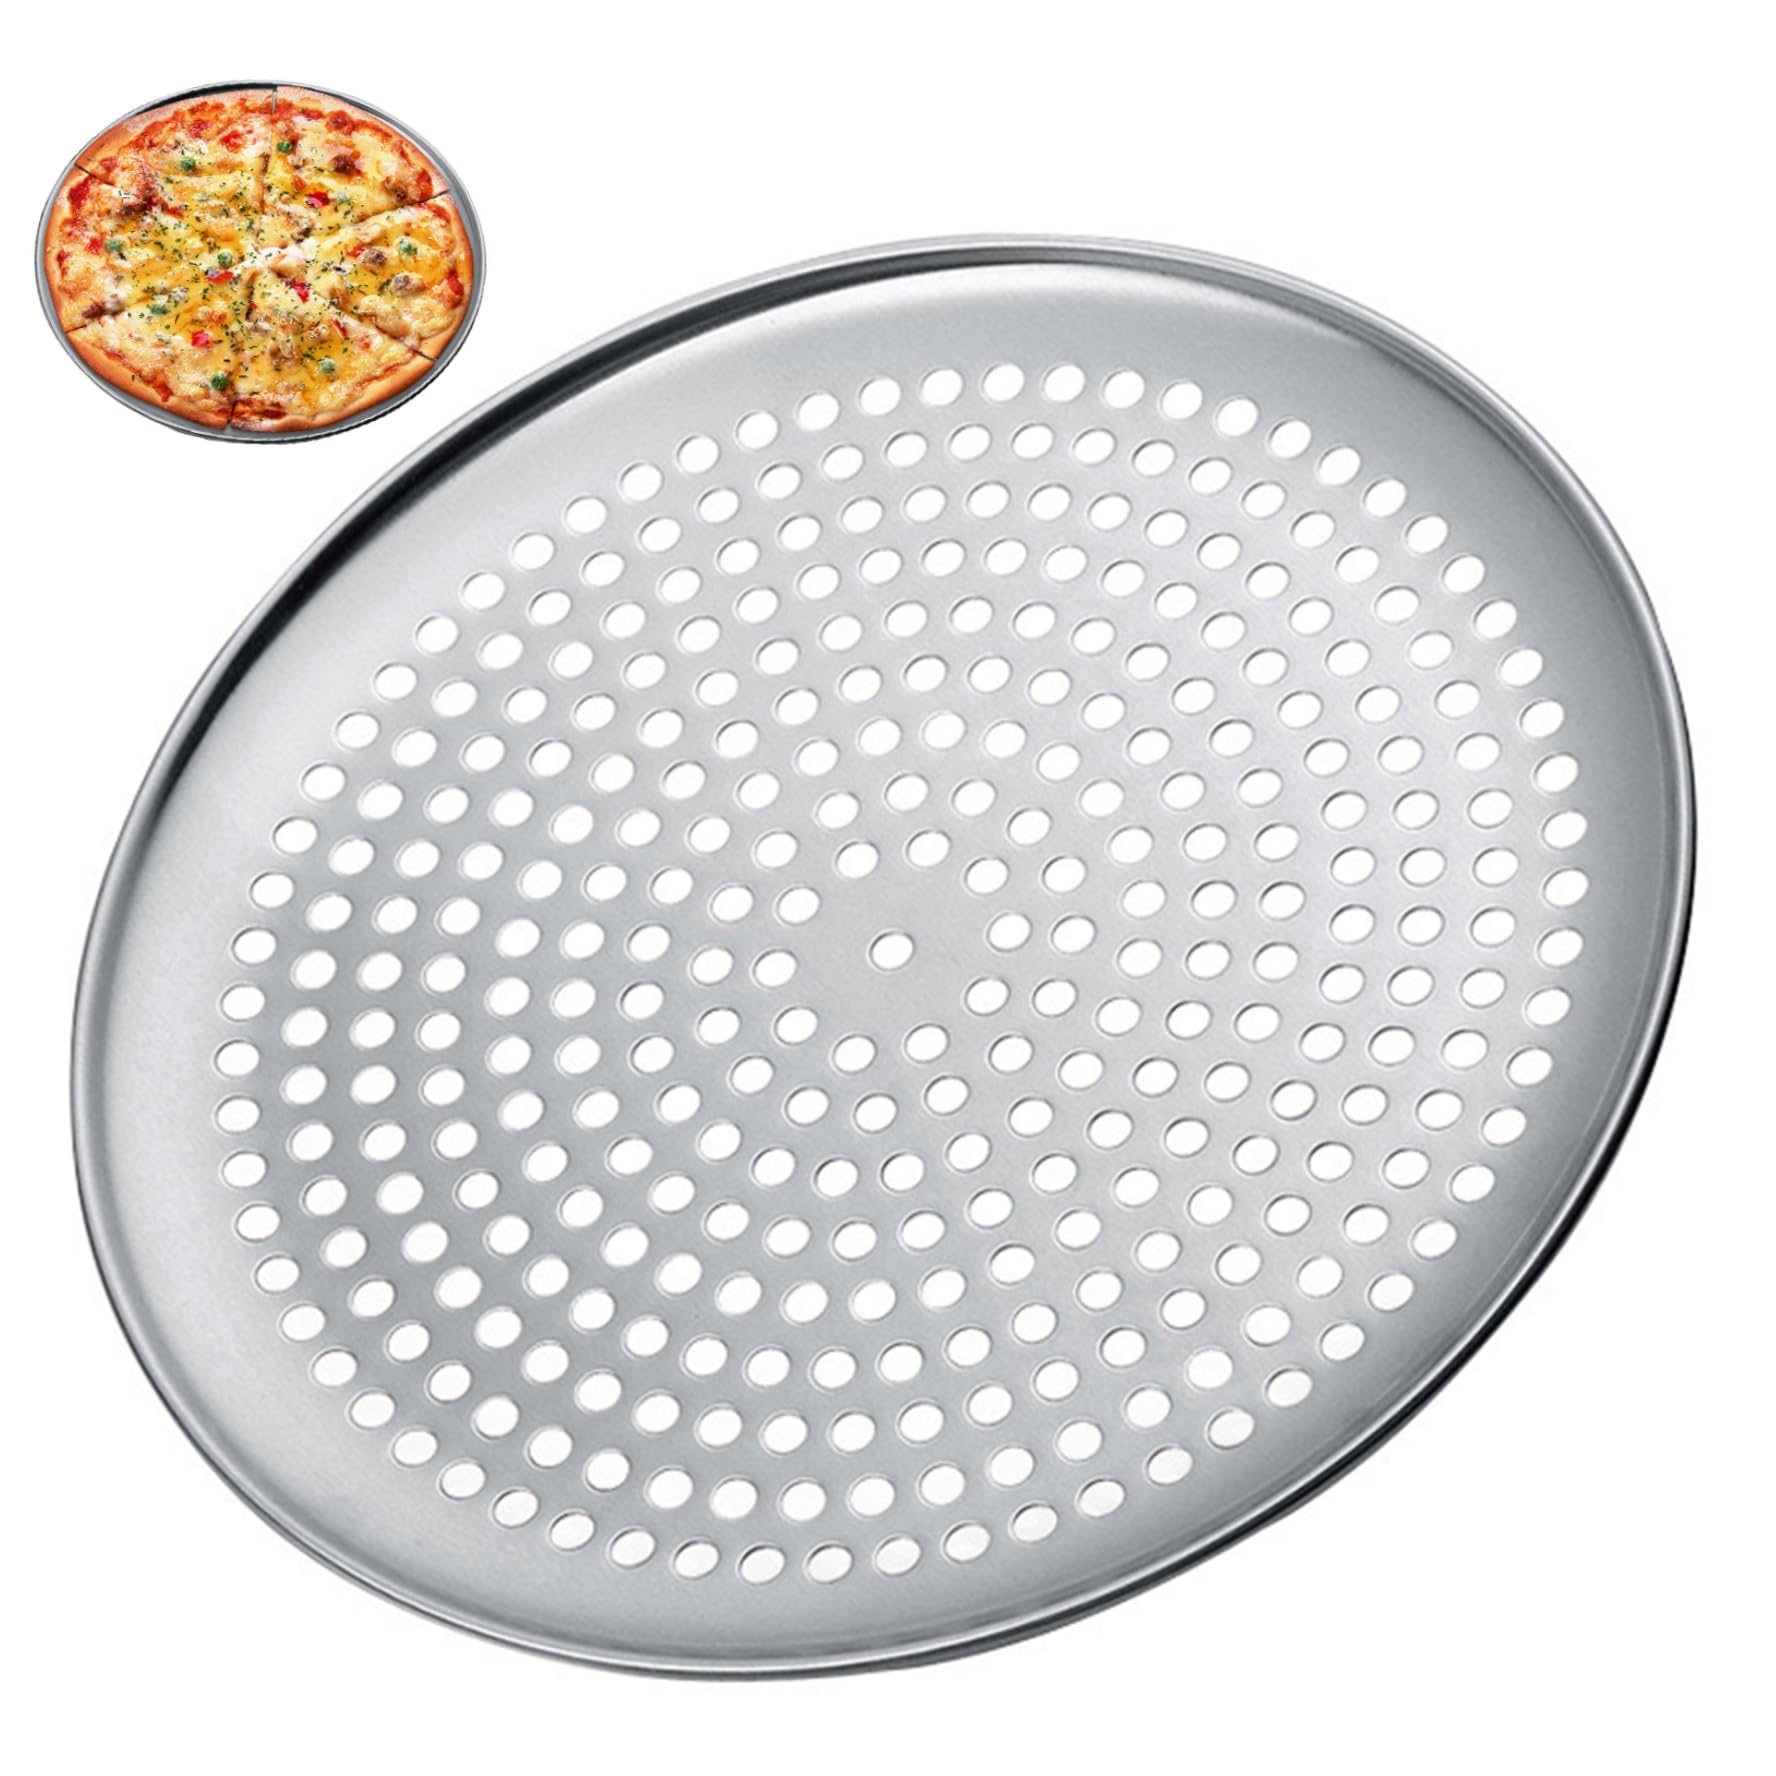 QCdeSoulBLV Pizza Pan With Holes, Round Pizza Pan 16 Inch Nonstick Steel Pizza Pan Tray with Perforated Holes for Baking Pie Pizza Crisper Server